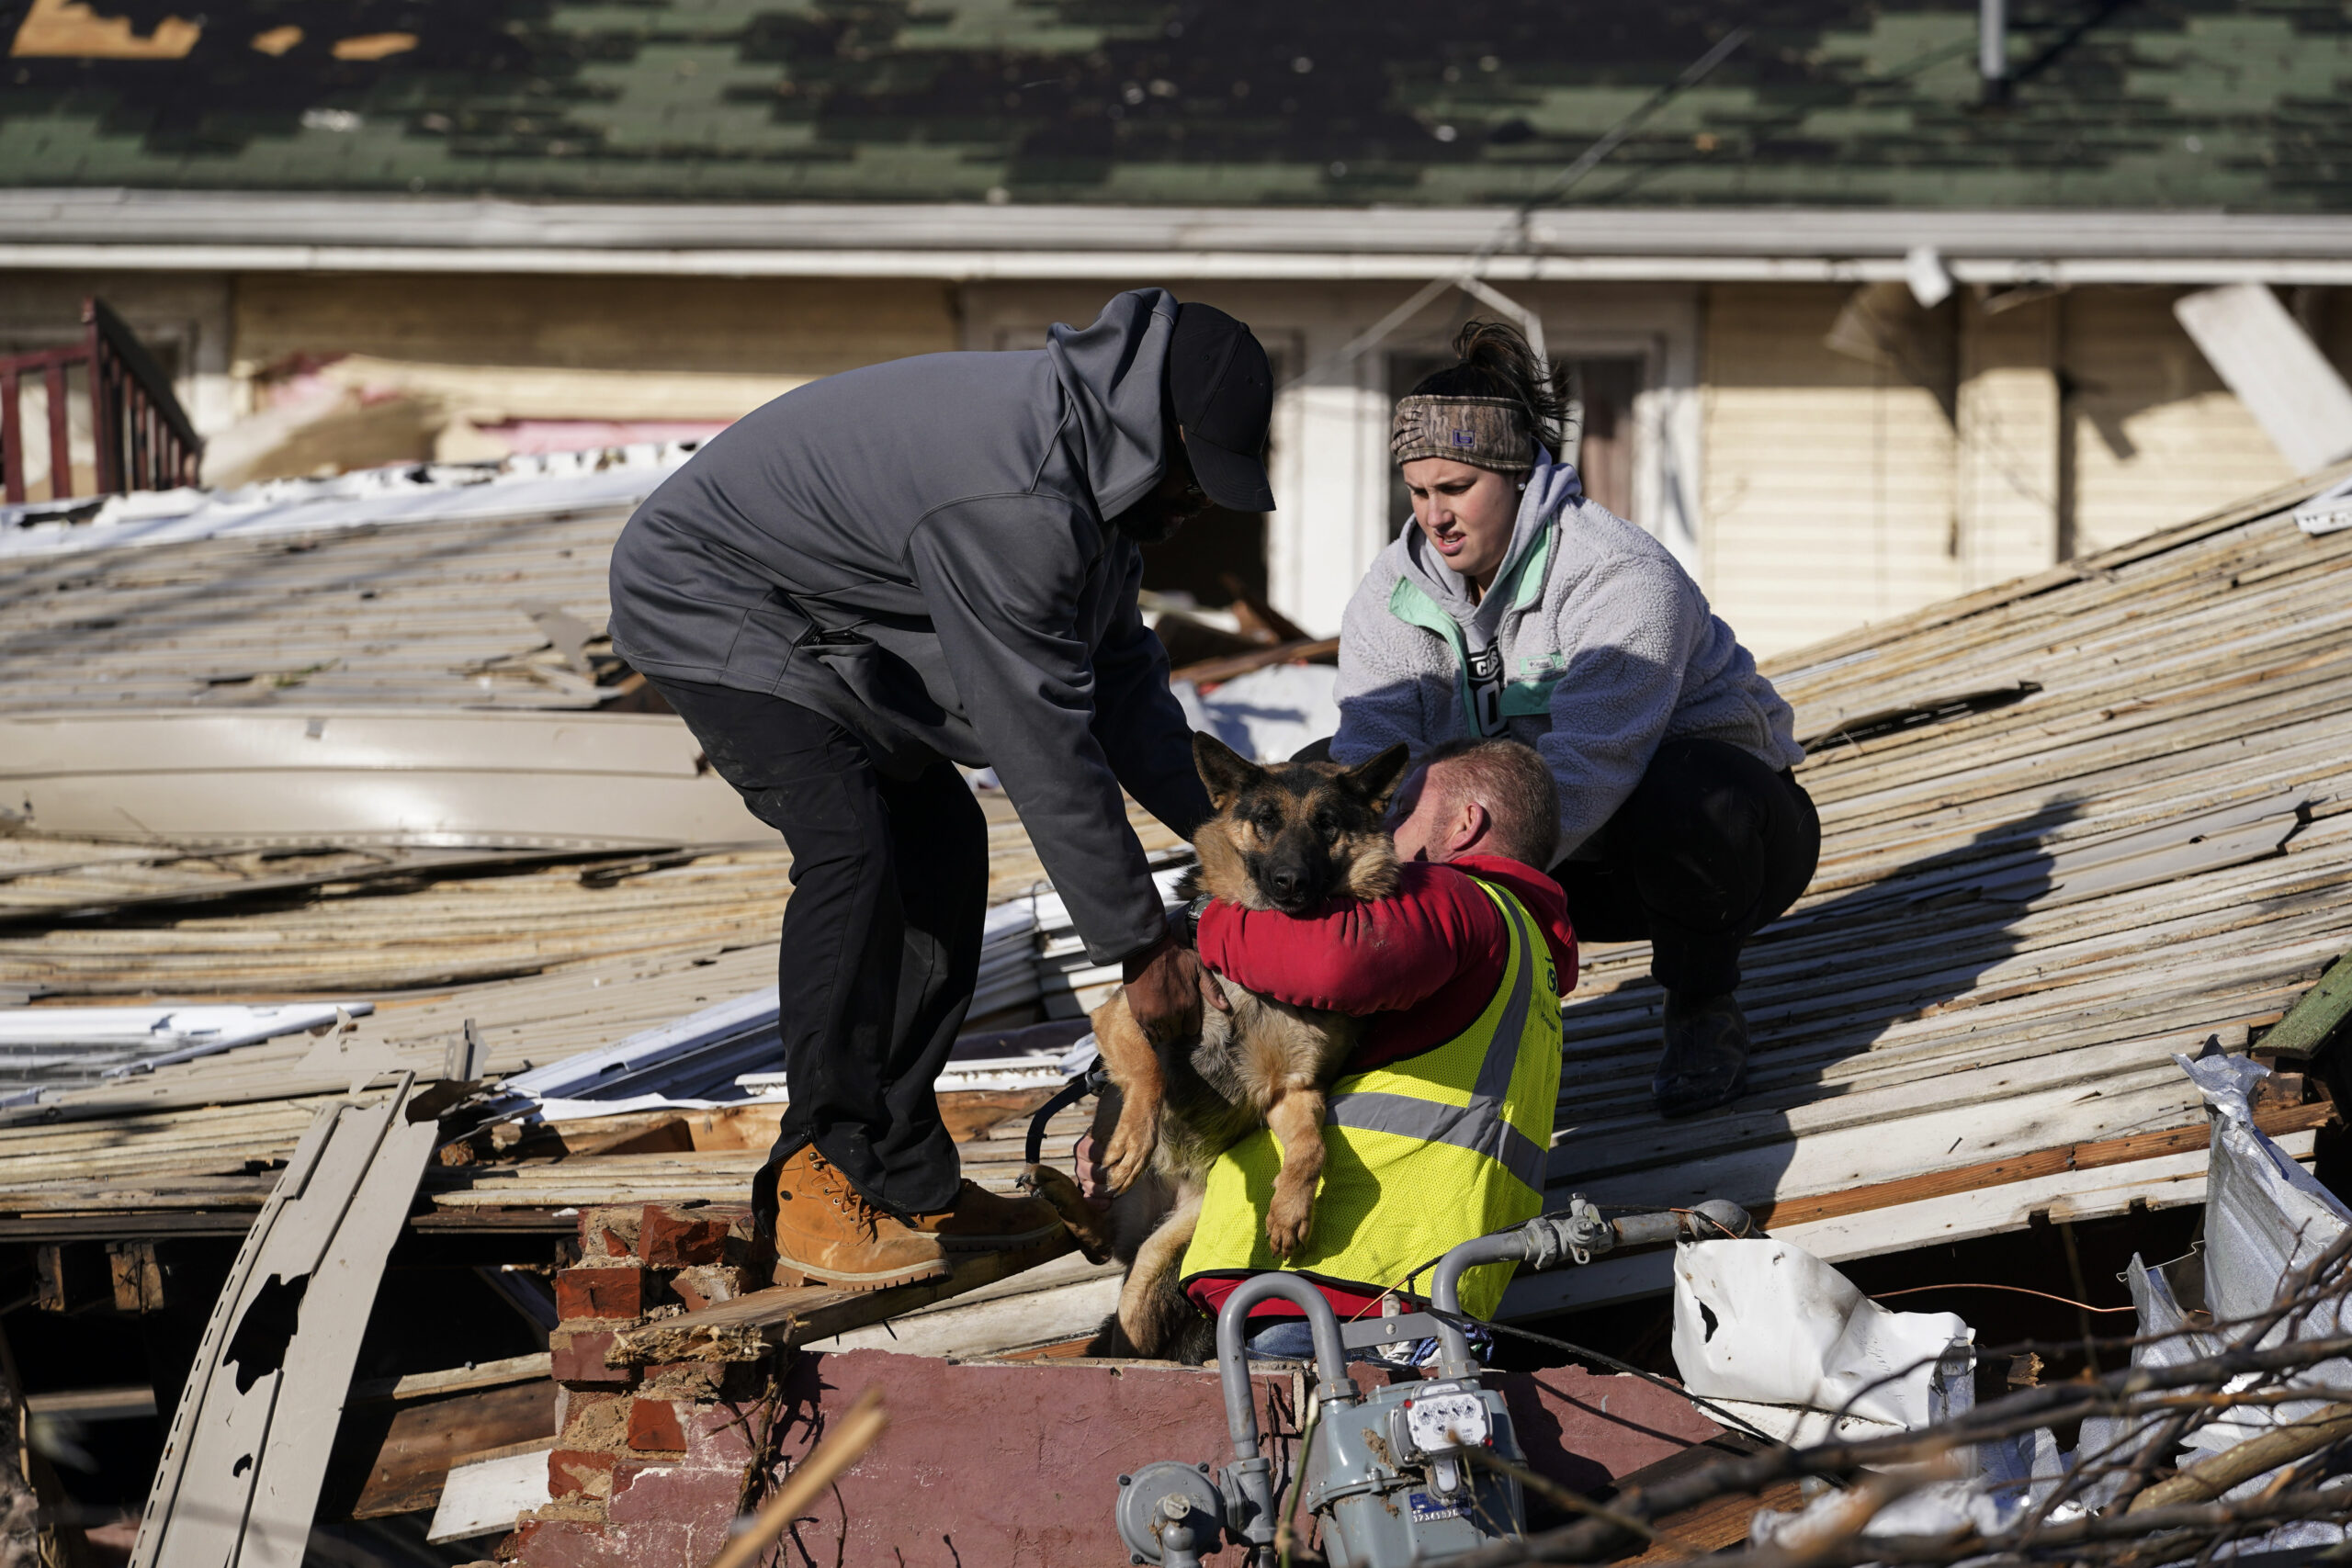 Dog owner Derrick Starks, left, Chris Buchanan, center and Niki Thompson, right, both from neighboring counties, attempt to rescue Cheyenne from a tornado-damaged home in Mayfield, Ky., on Saturday, Dec. 11, 2021. Tornadoes and severe weather caused catastrophic damage across multiple states late Friday, killing dozens of people overnight. (AP Photo/Mark Humphrey)